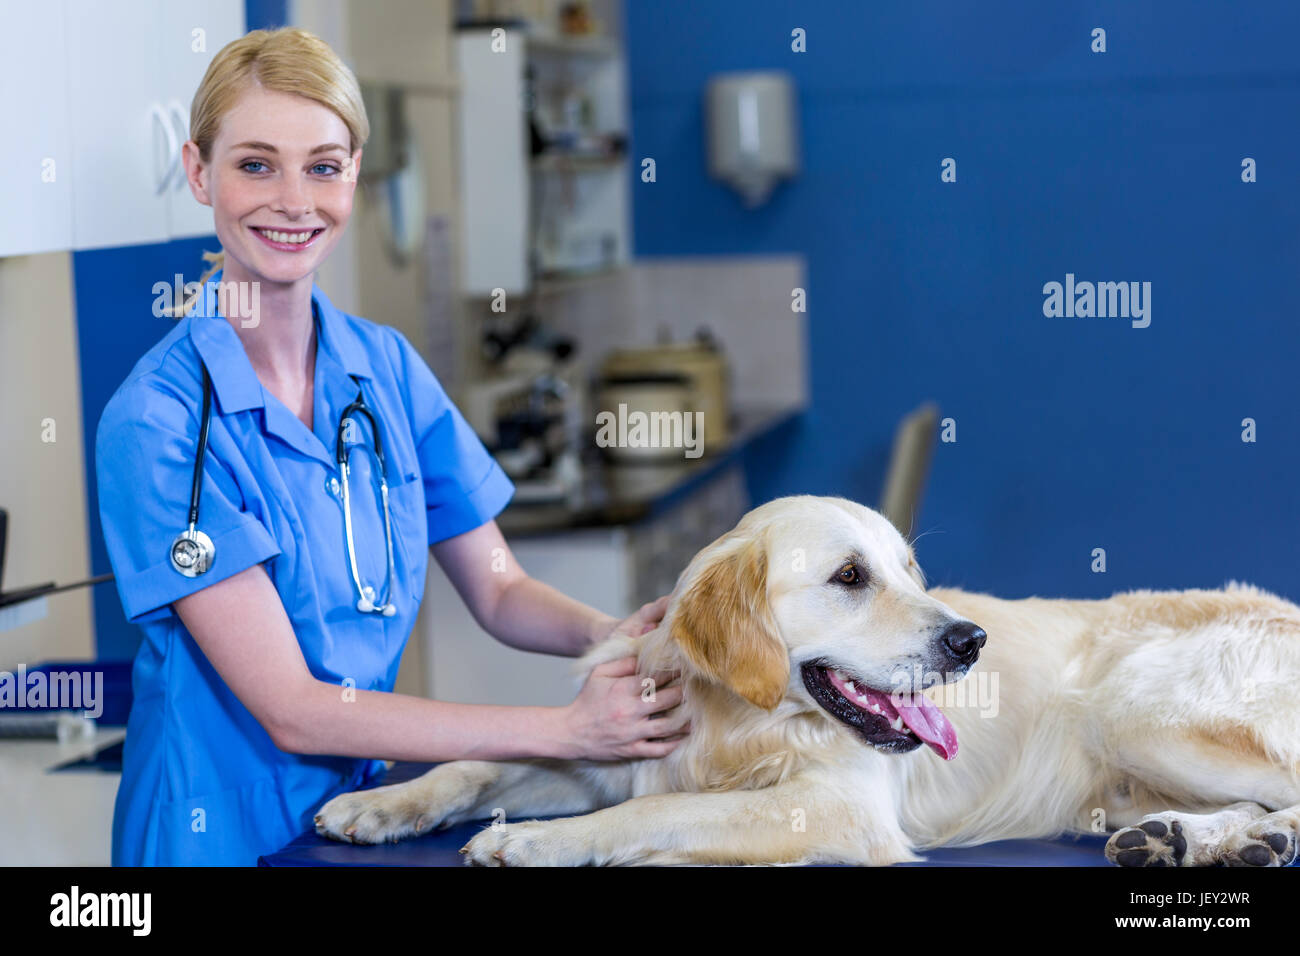 Woman vet smiling and posing with a dog Stock Photo